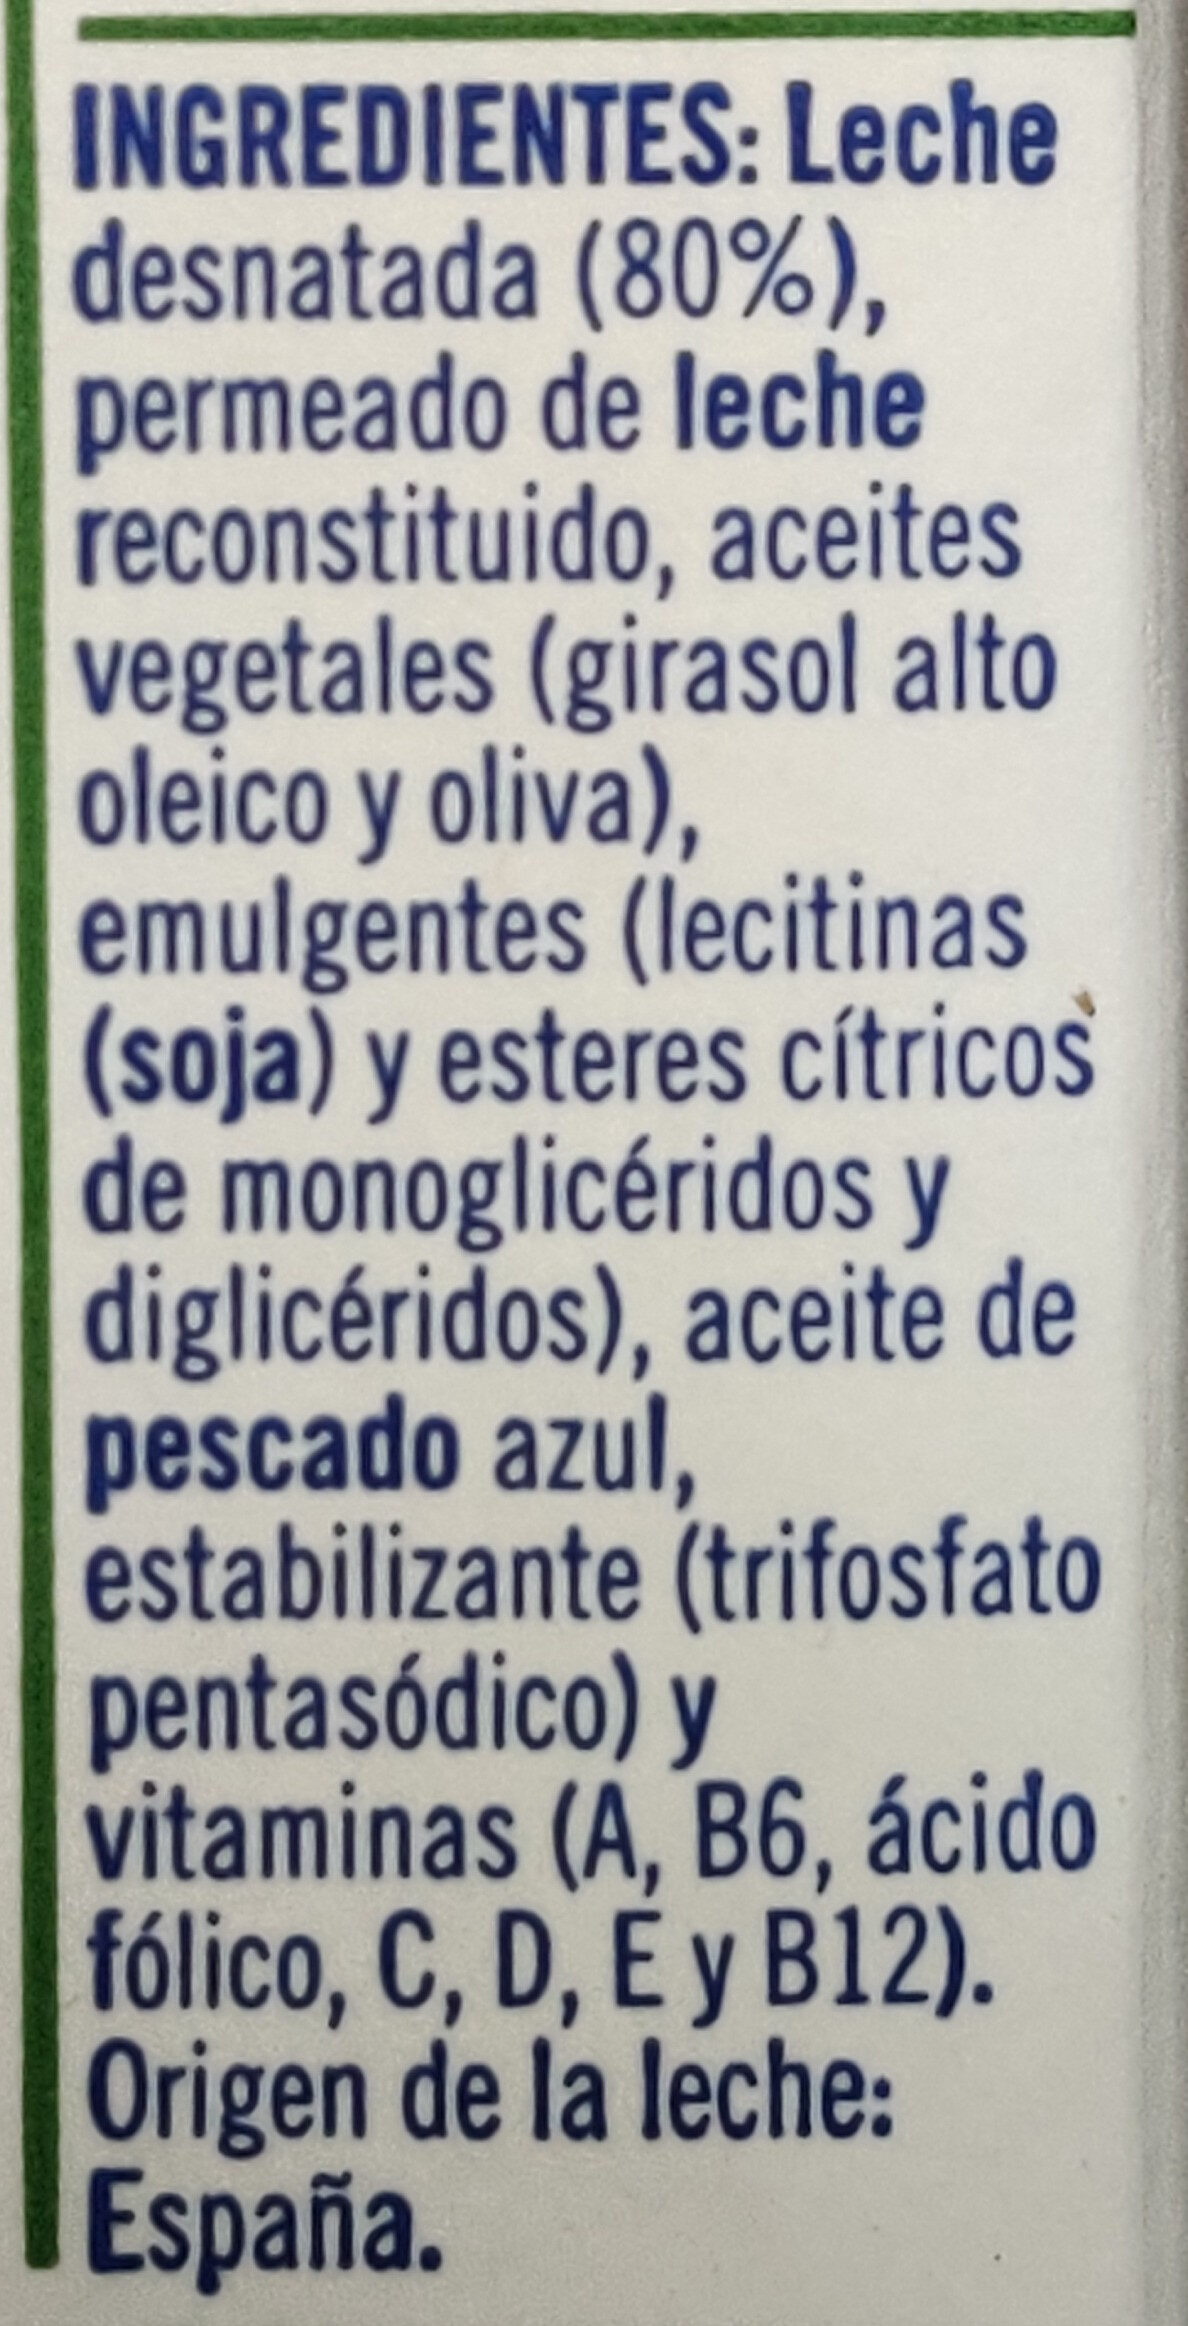 Leche con omega 3 - Ingredients - es